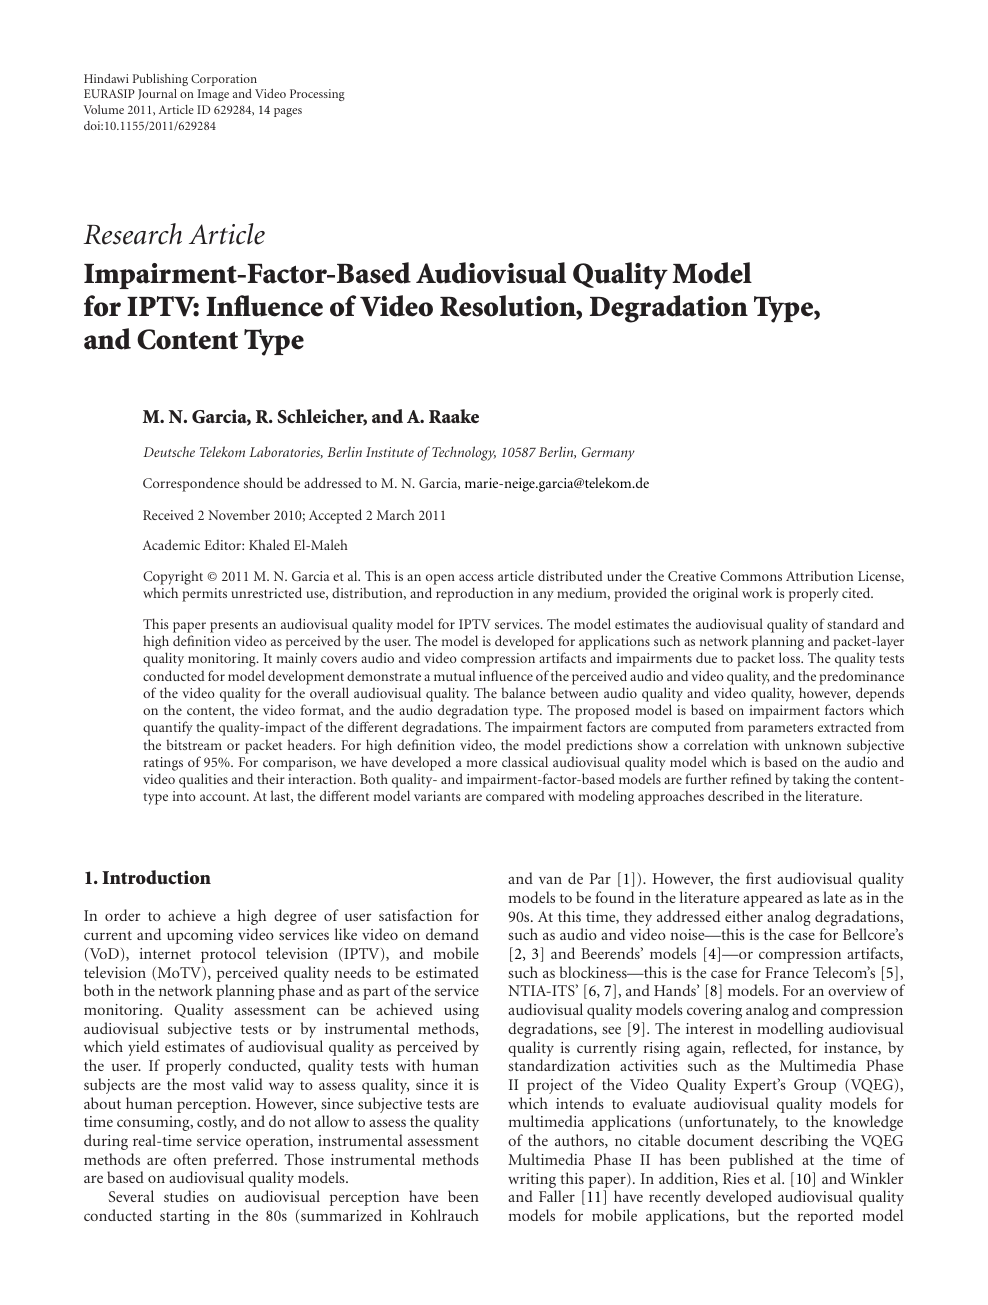 Impairment Factor Based Audiovisual Quality Model For Iptv Influence Of Video Resolution Degradation Type And Content Type Topic Of Research Paper In Electrical Engineering Electronic Engineering Information Engineering Download Scholarly